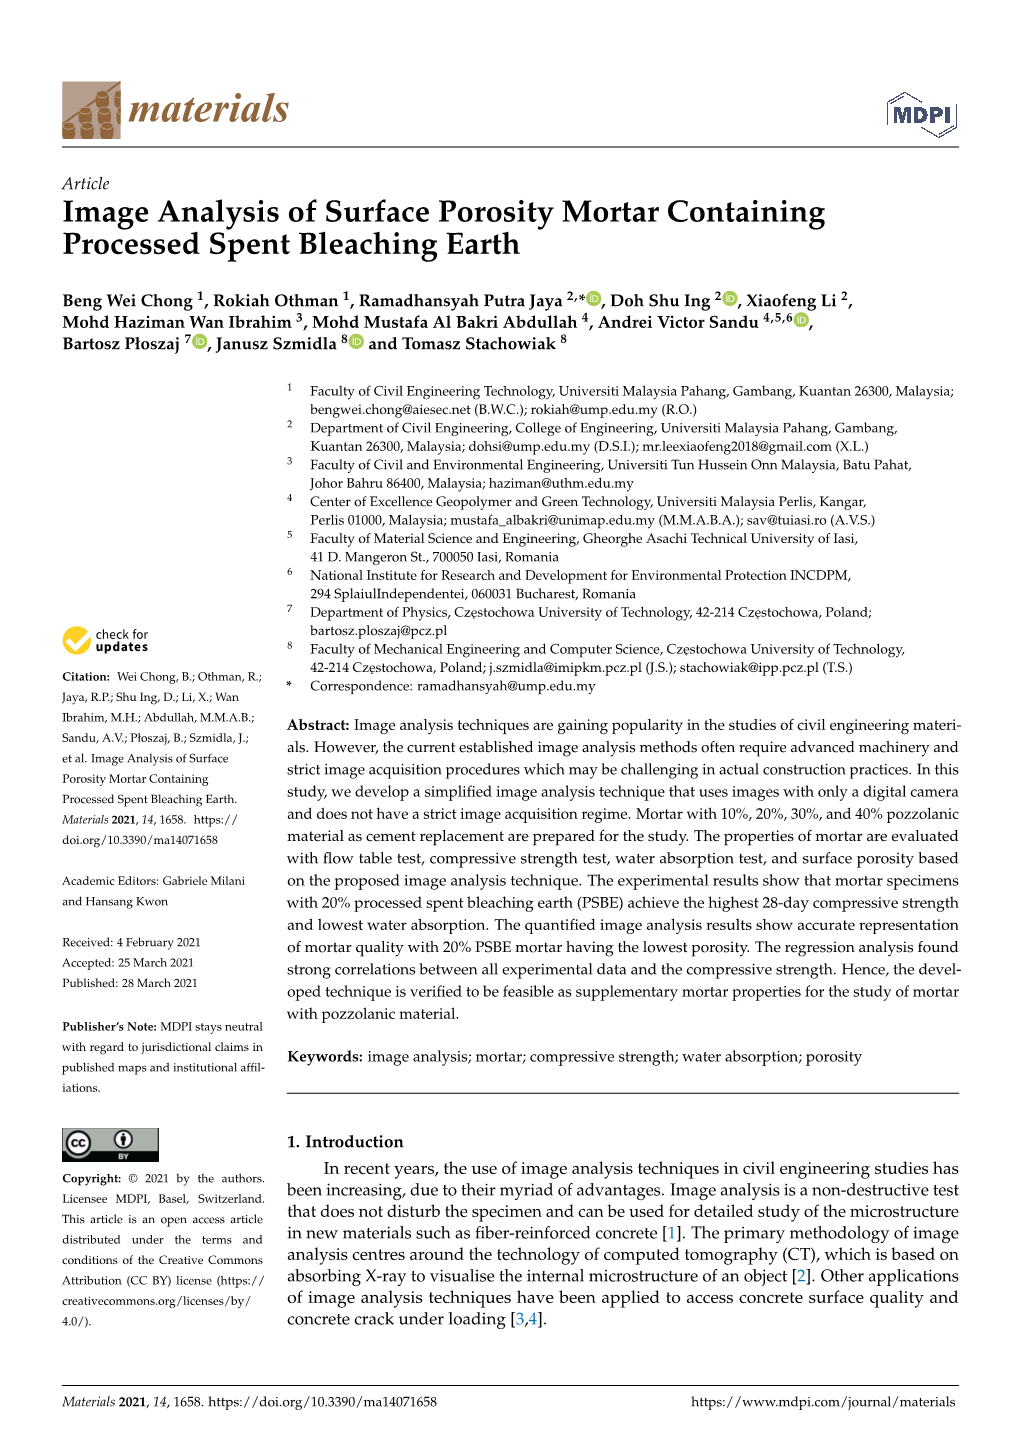 Image Analysis of Surface Porosity Mortar Containing Processed Spent Bleaching Earth